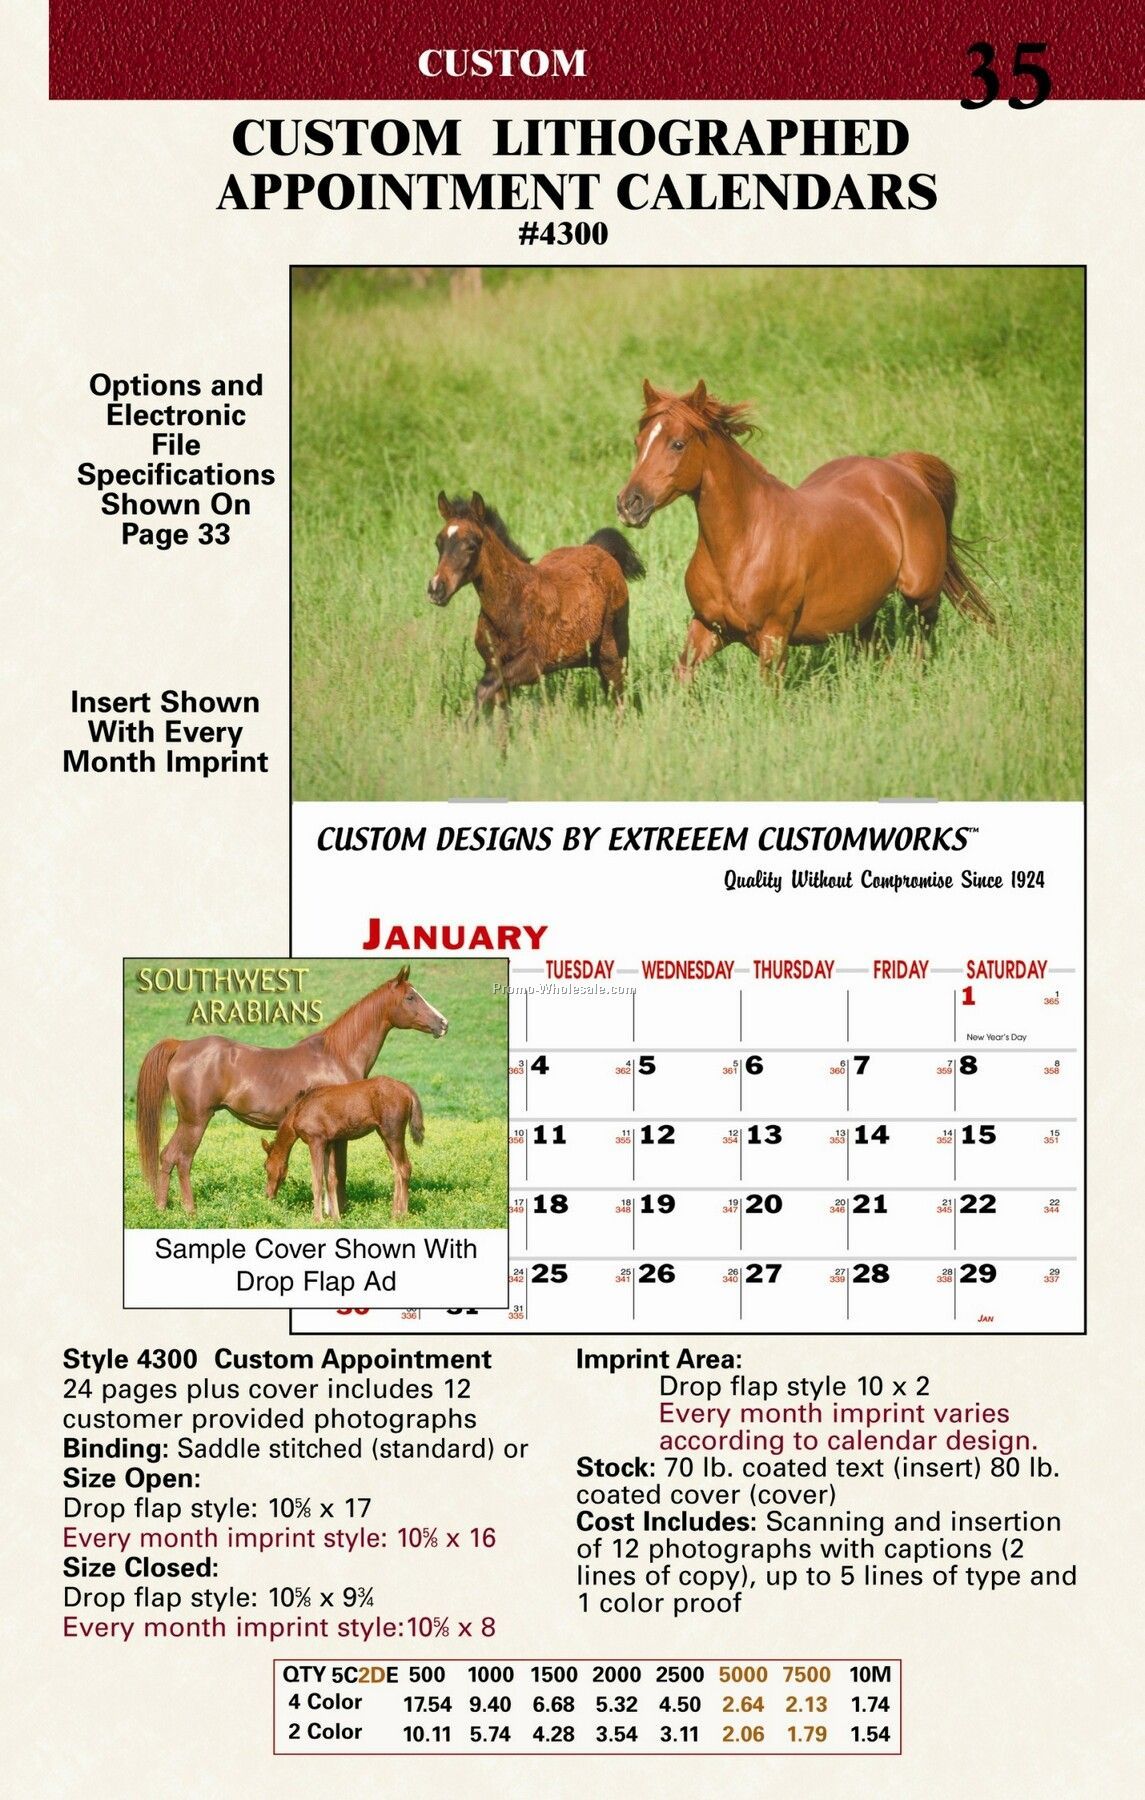 2 Color Custom Lithograph Appointment Calendars - Every Month Imprint